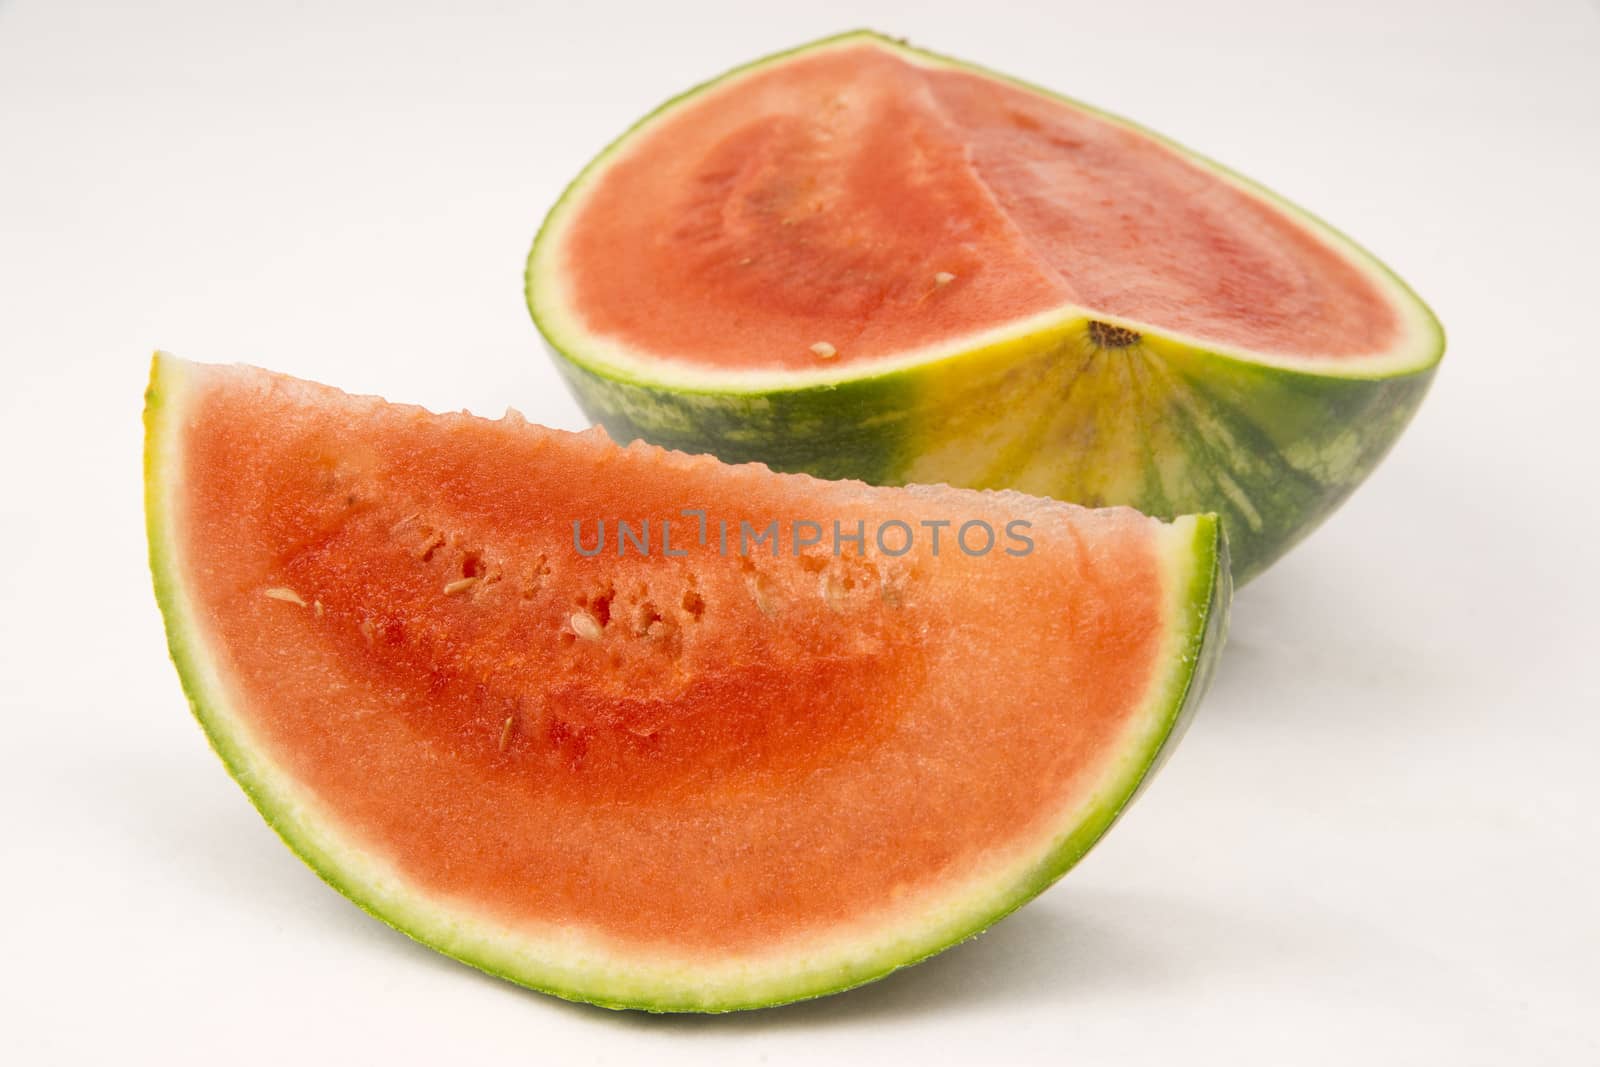 Watermelon Slices Large Melon Fruit Sweet Produce Sections White Background